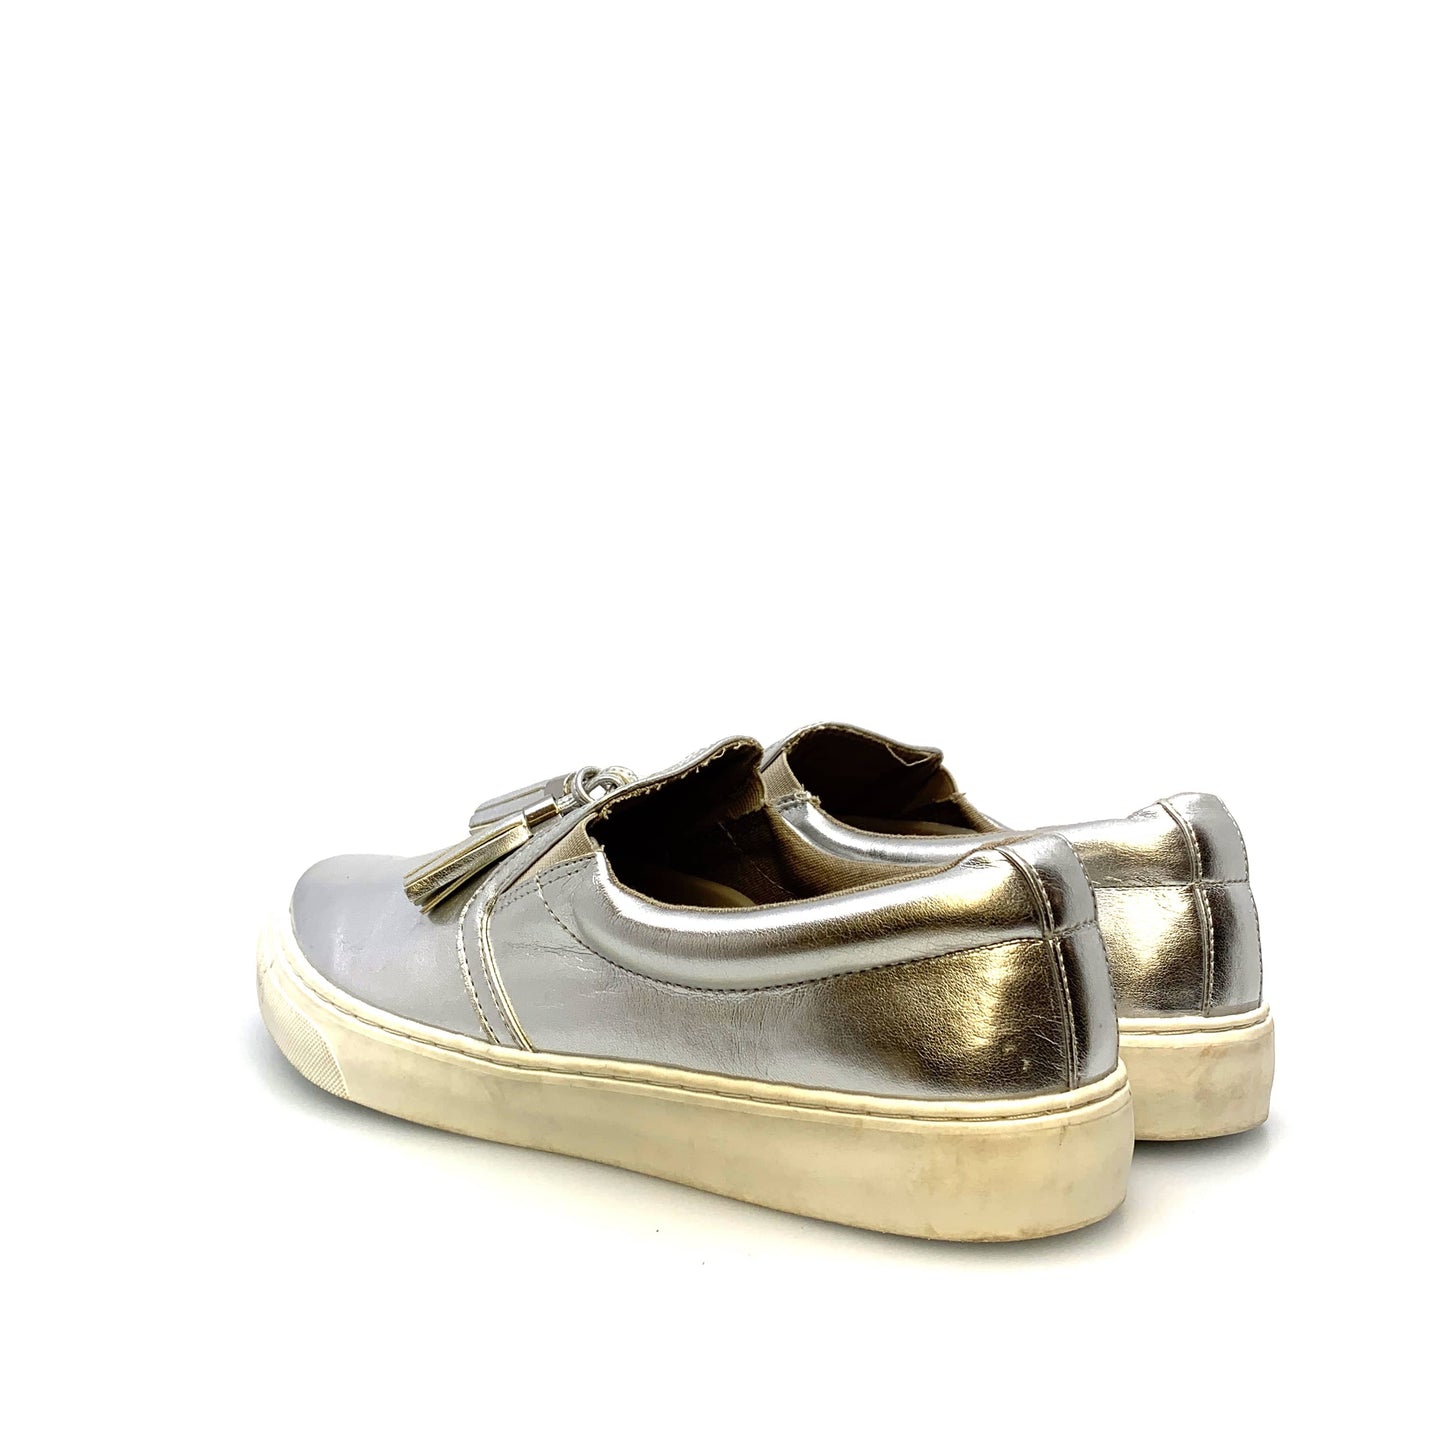 SODA Womens Size 11 Silver Tassled Loafer Sneakers